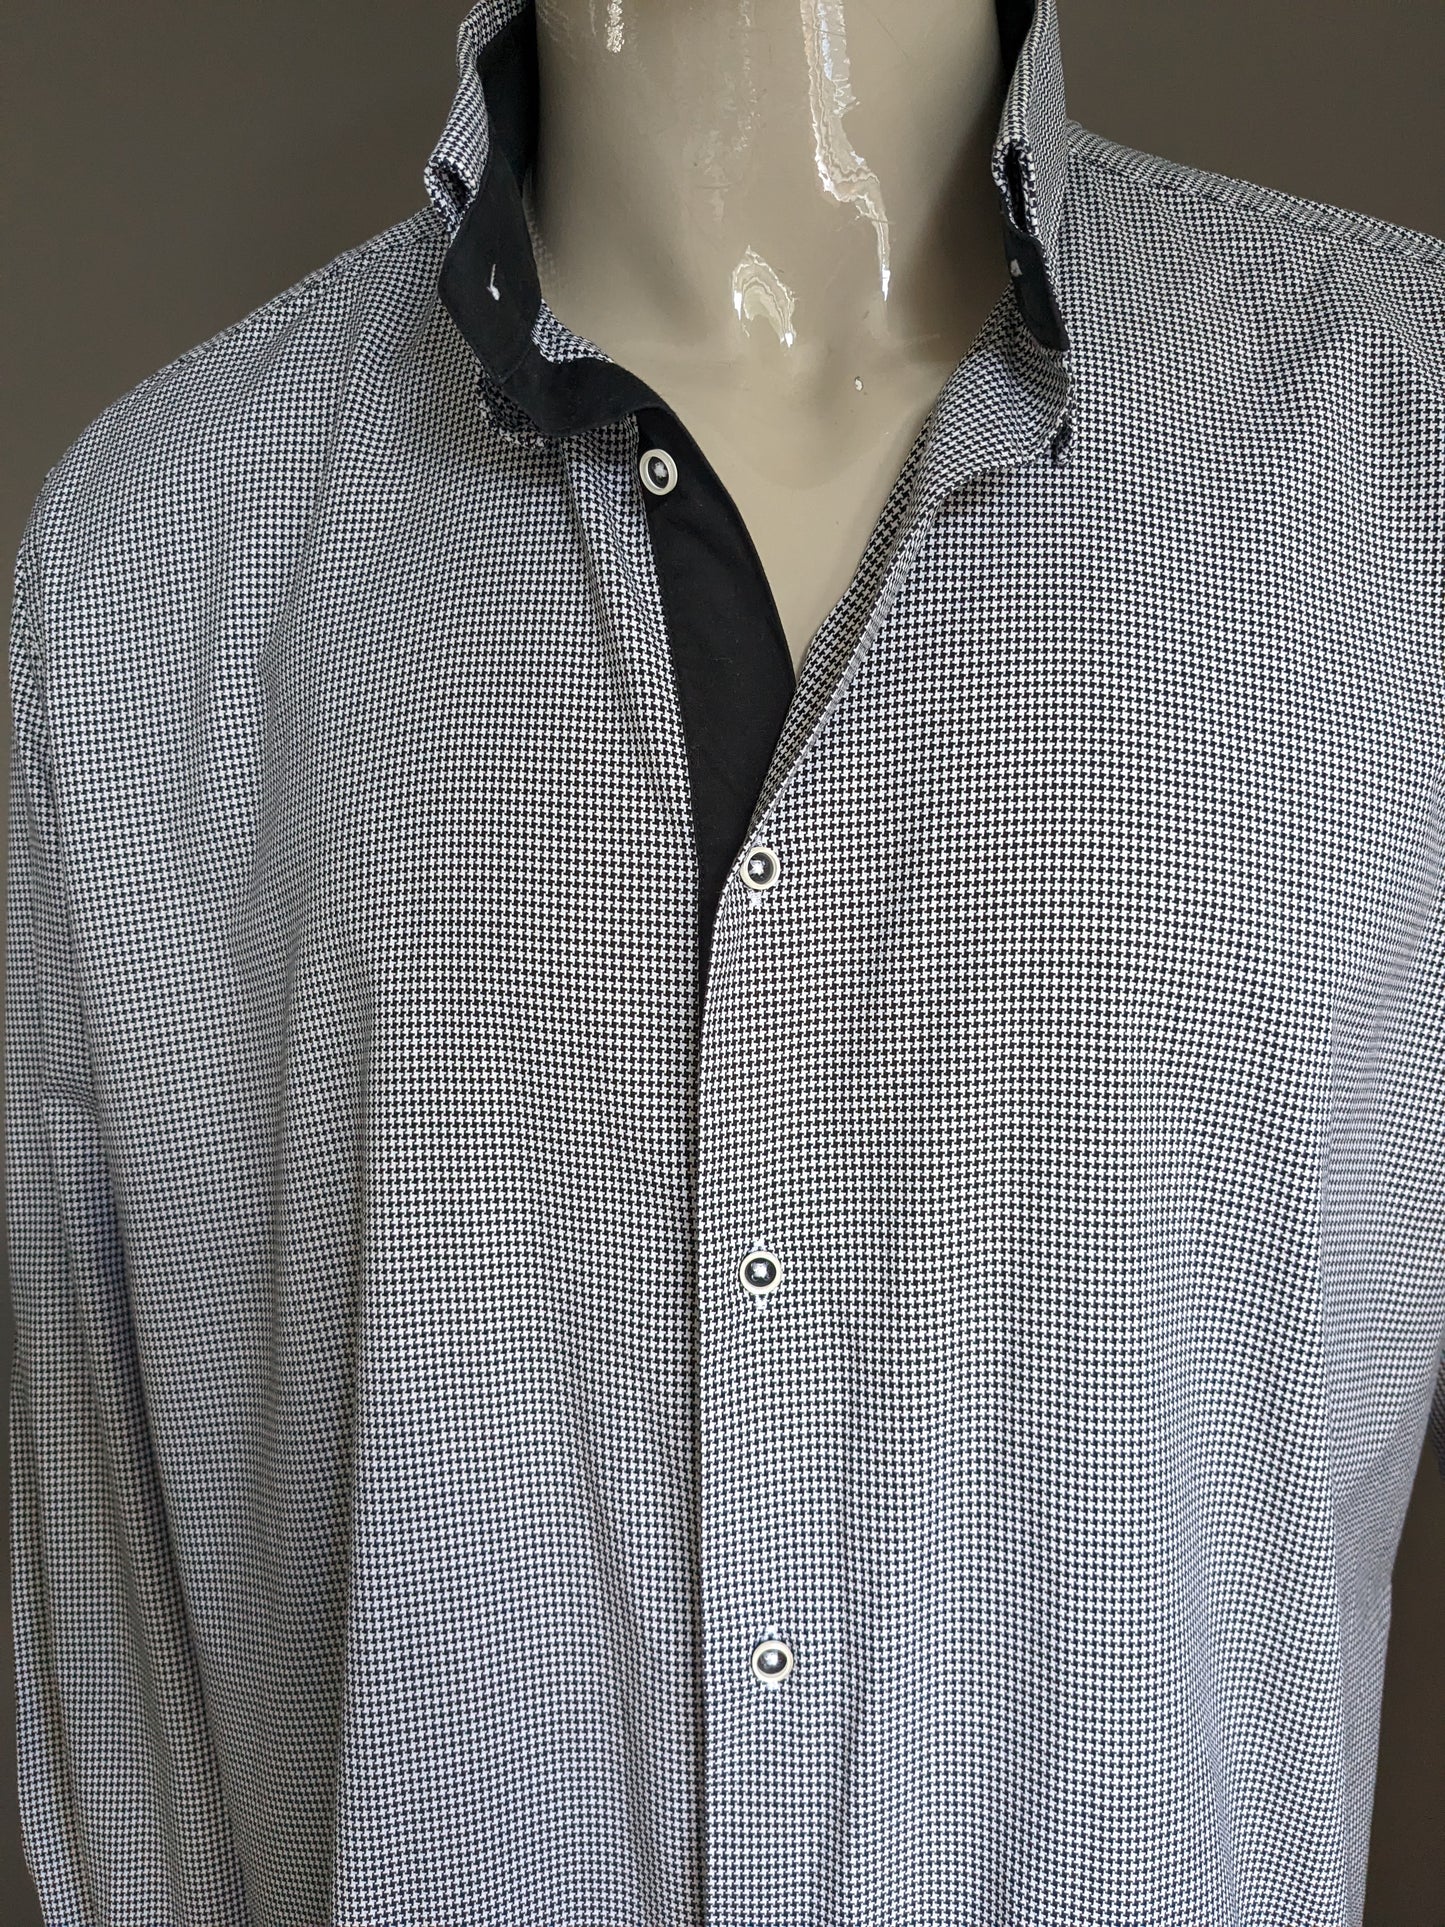 Blumfontain shirt with elbow patches. Black and white motif. Size 2XL / XXL.